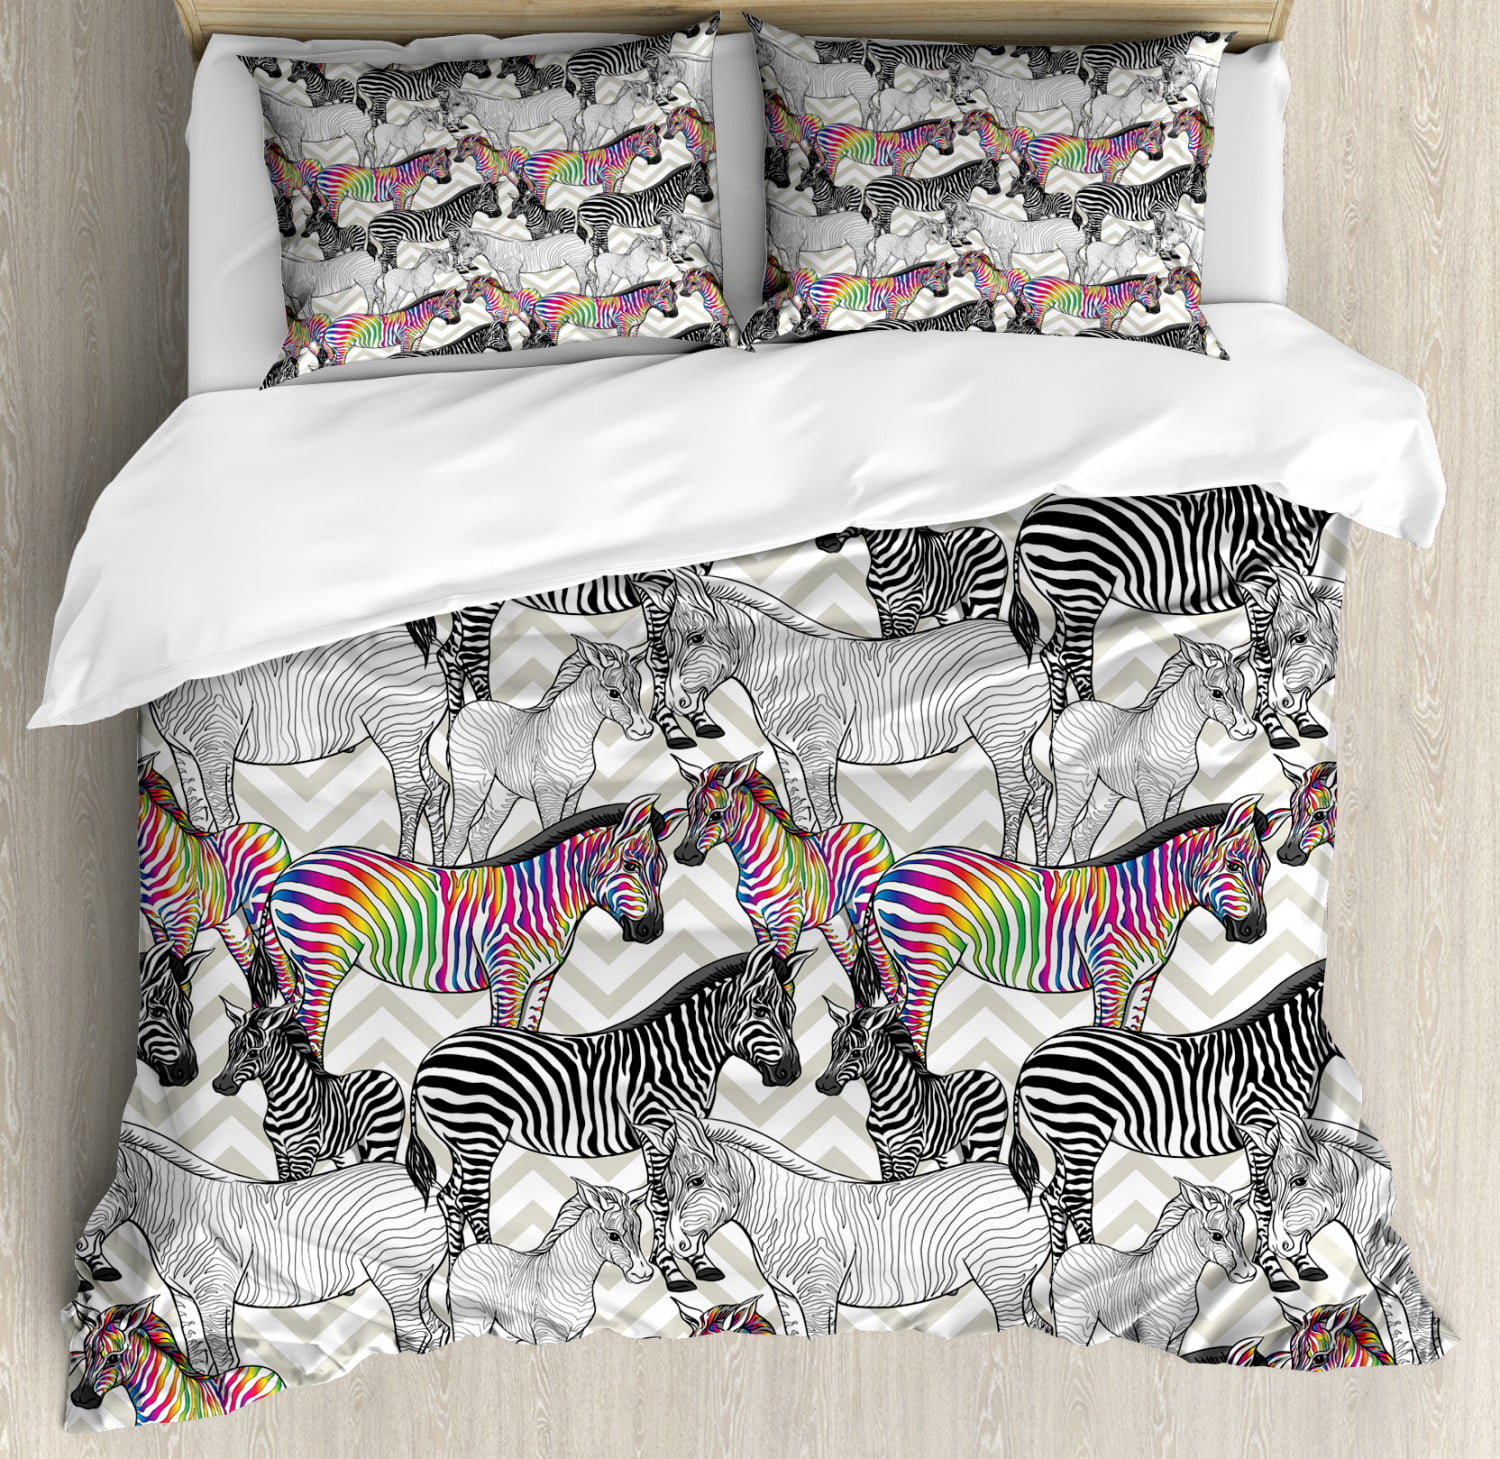 Indian zebra black n white Queen Size Print Cotton bad Sheet With 2 Pilow Covers 